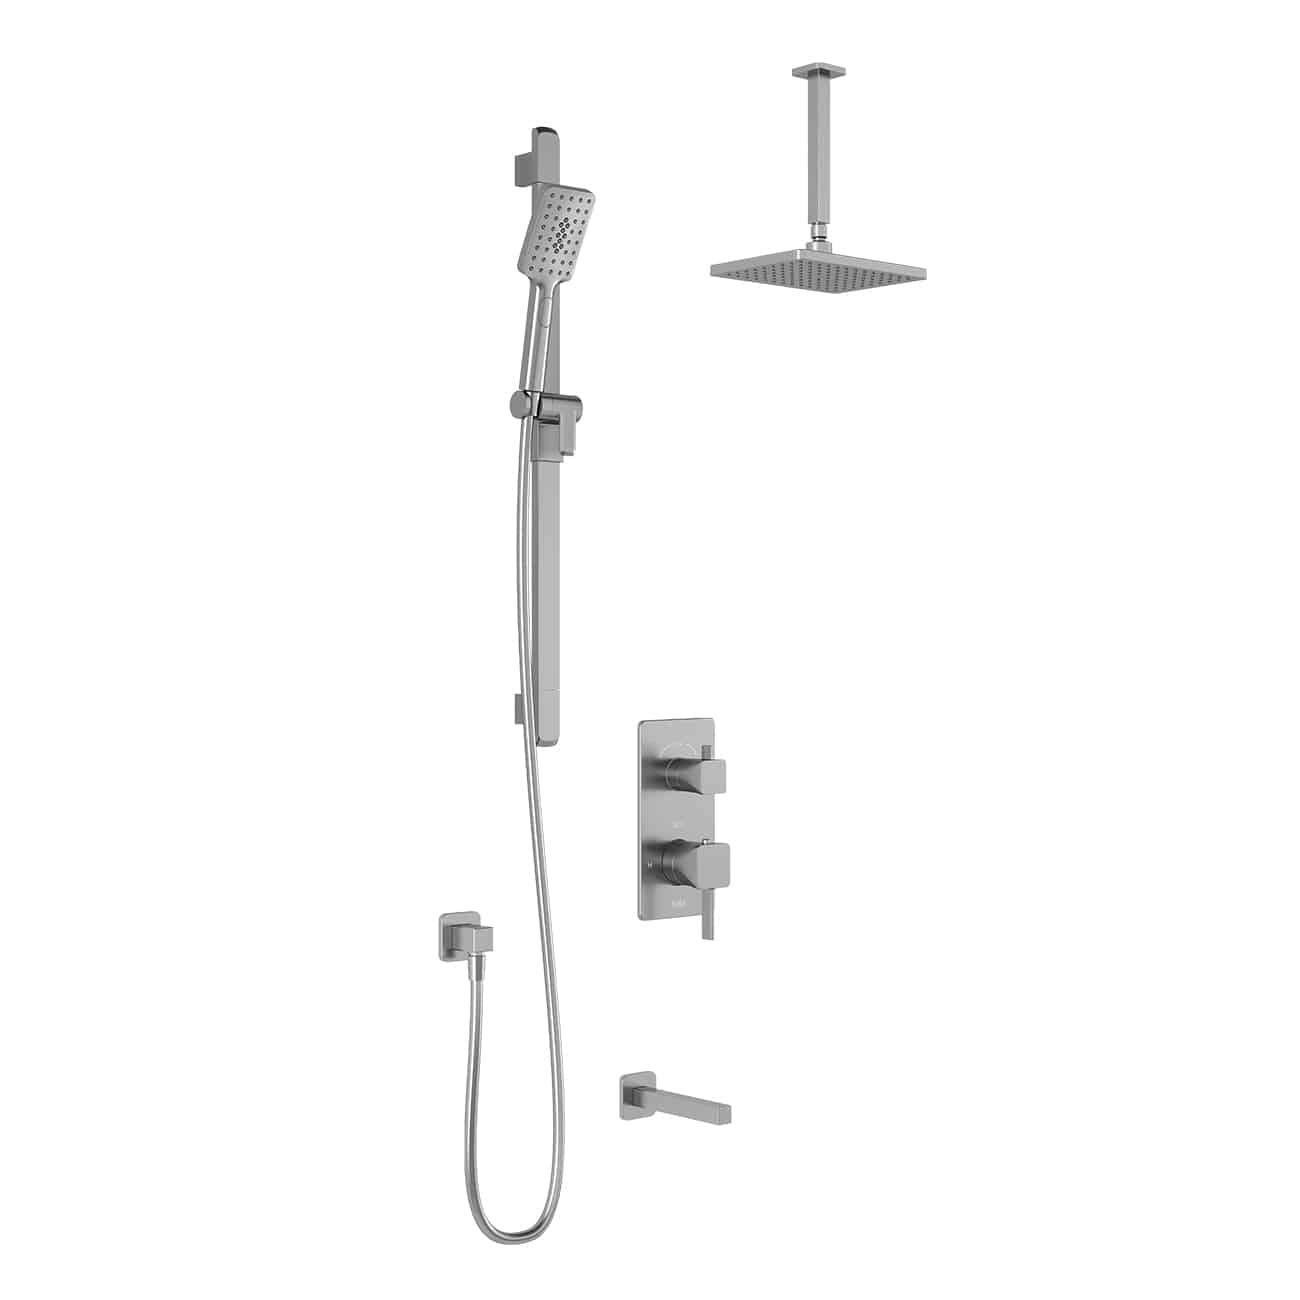 Kalia SquareOne TD3 (Valve Not Included) AQUATONIK T/P with Diverter Shower System with 10-1/4" Shower Head with Vertical Ceiling Arm -Chrome